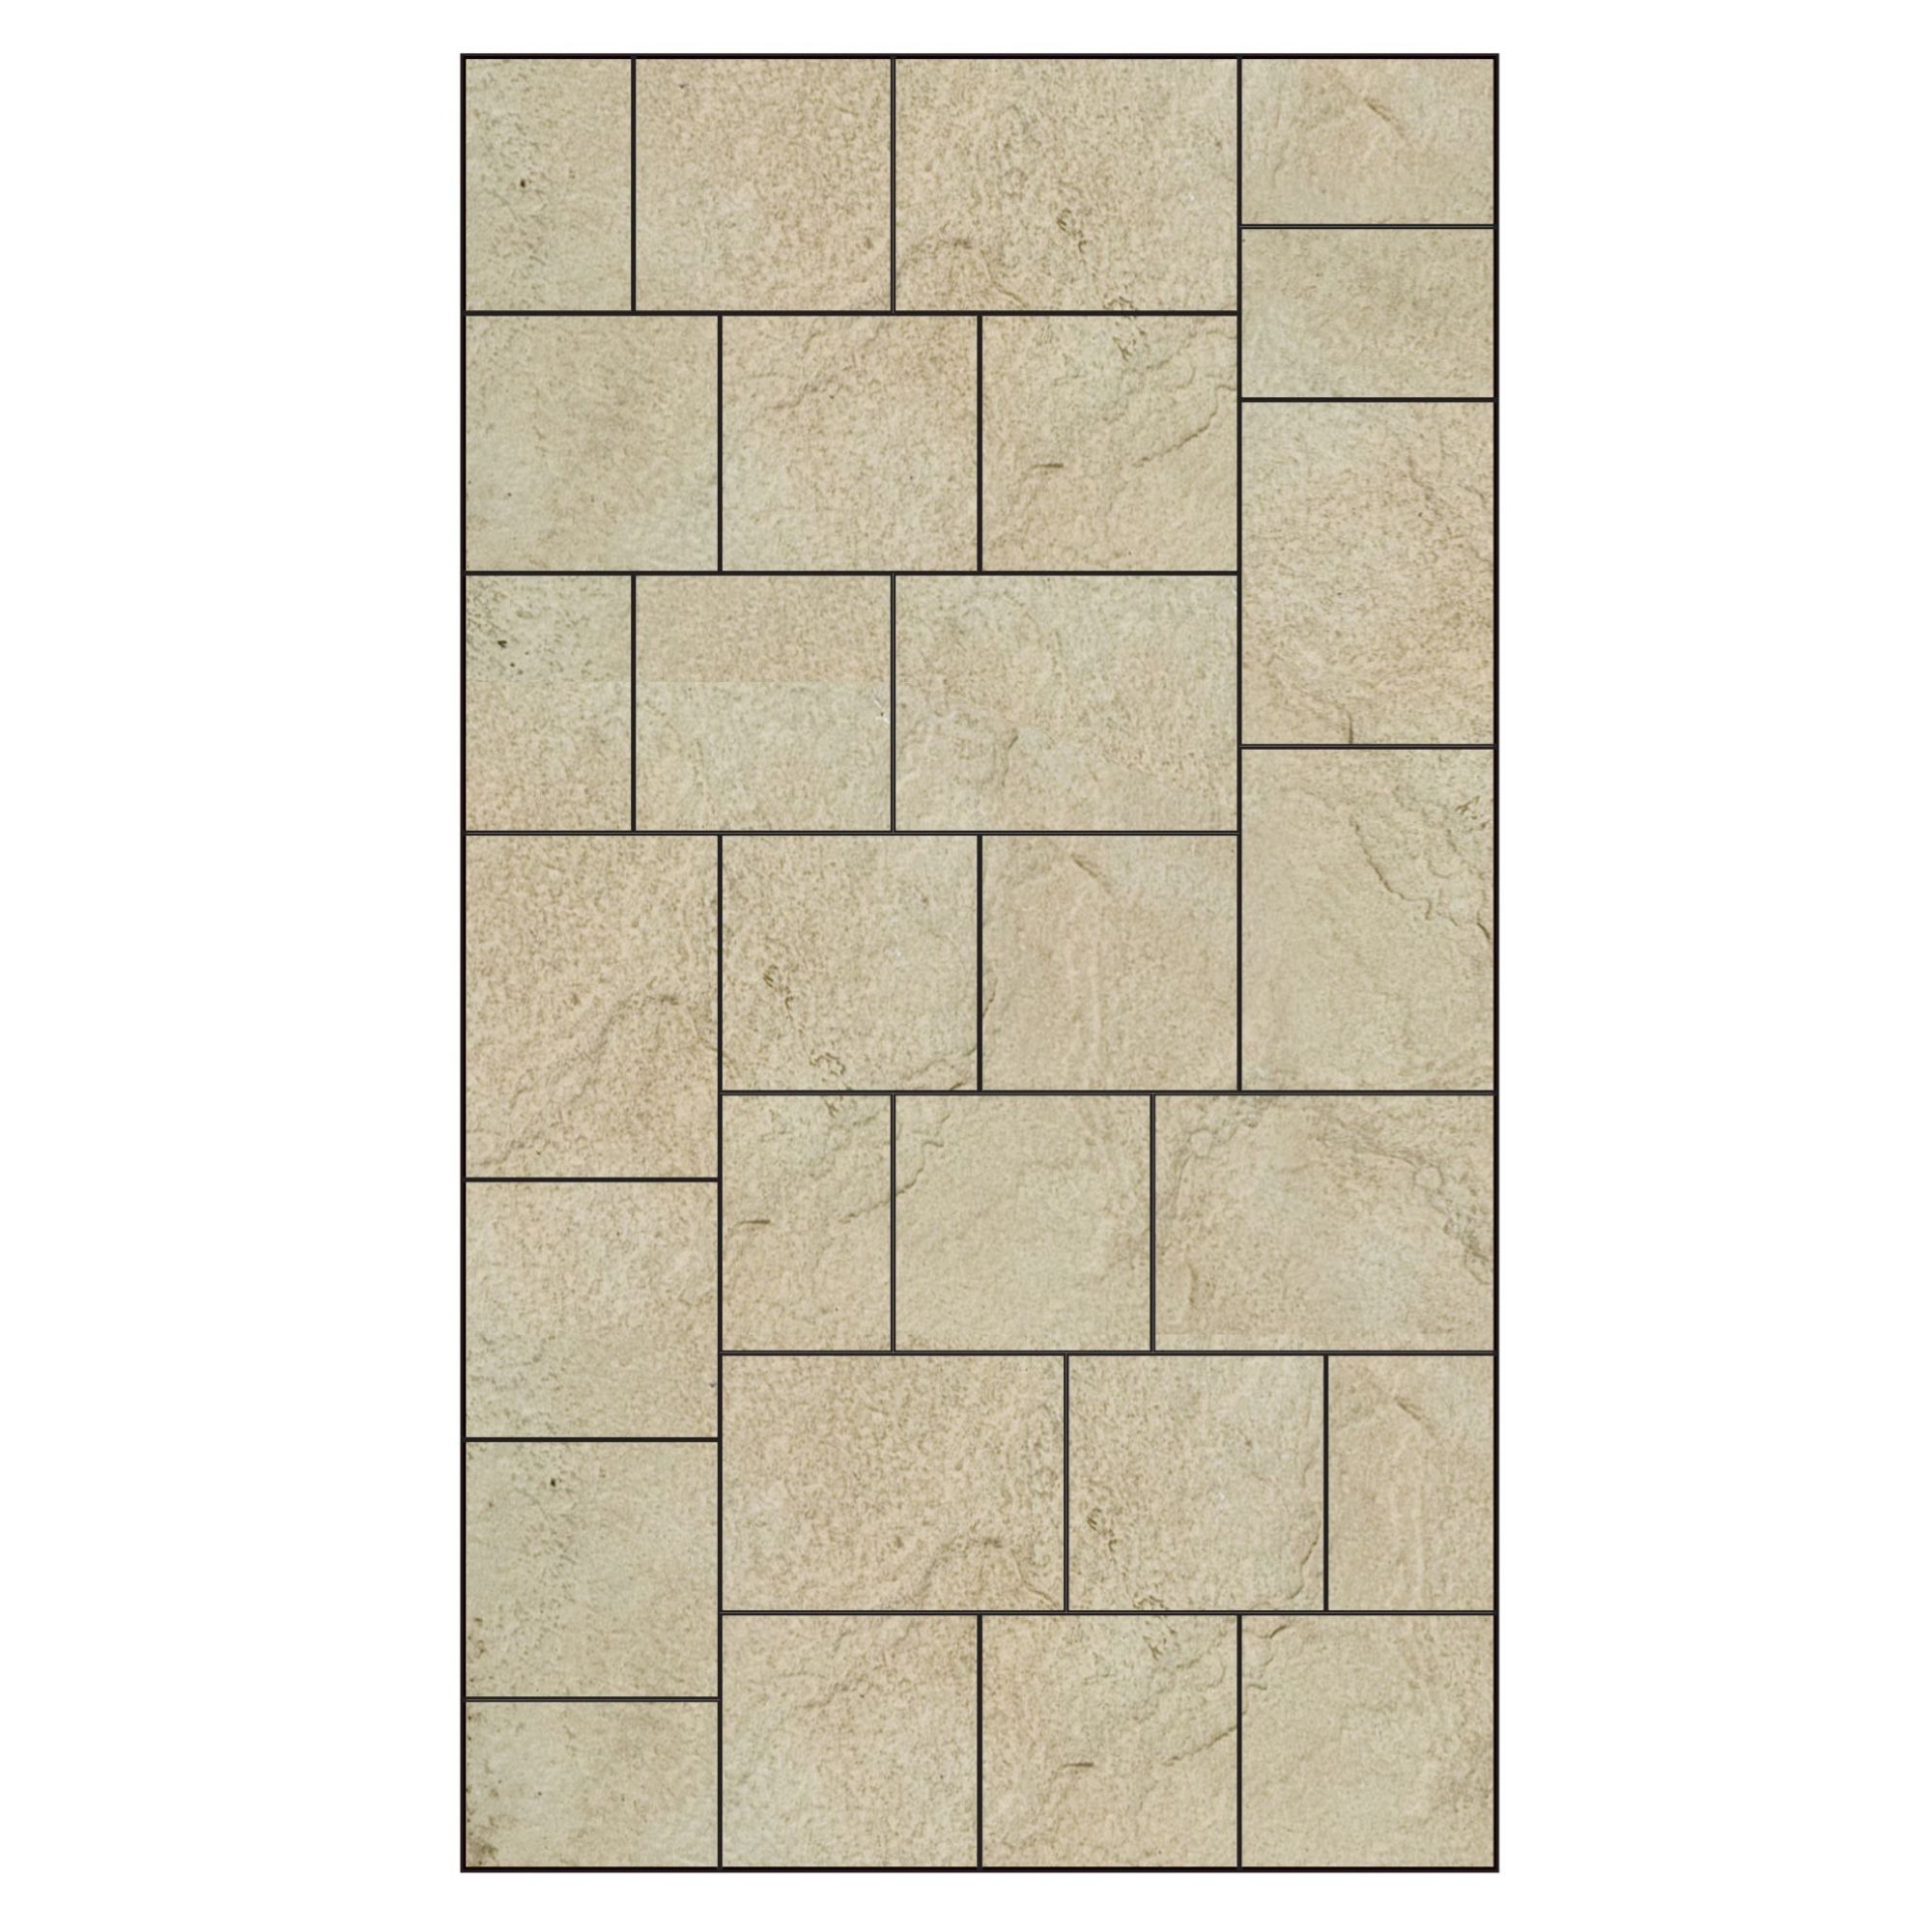 Bradstone Ashbourne Cotswold Reconstituted stone Paving set, 9.72m² Pack of 48